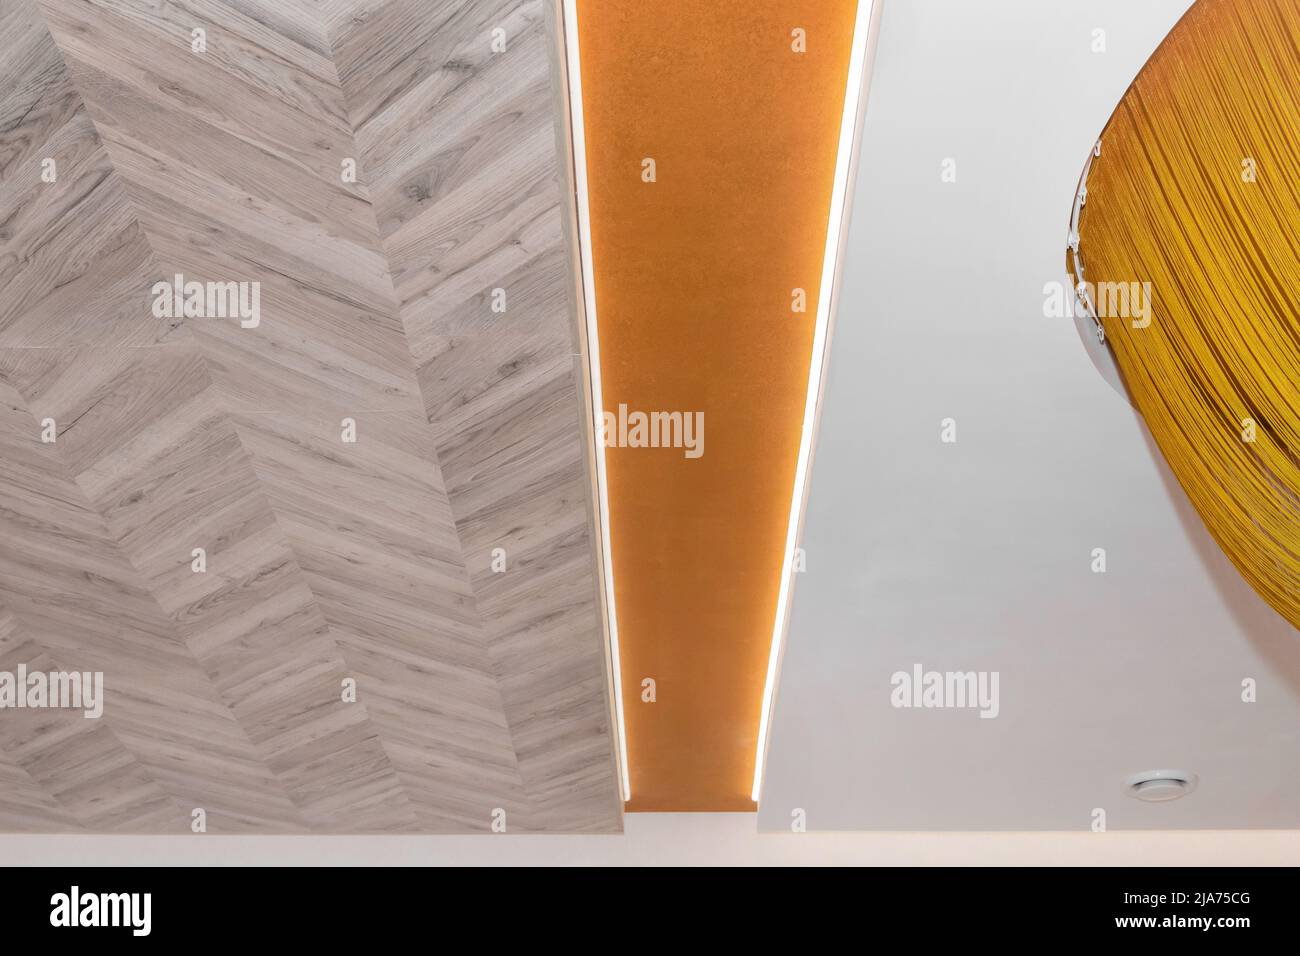 Wooden Laminate Abstract Ceiling Design Modern Interior Architecture Background Structure with LED Linear Light Decoration. Stock Photo